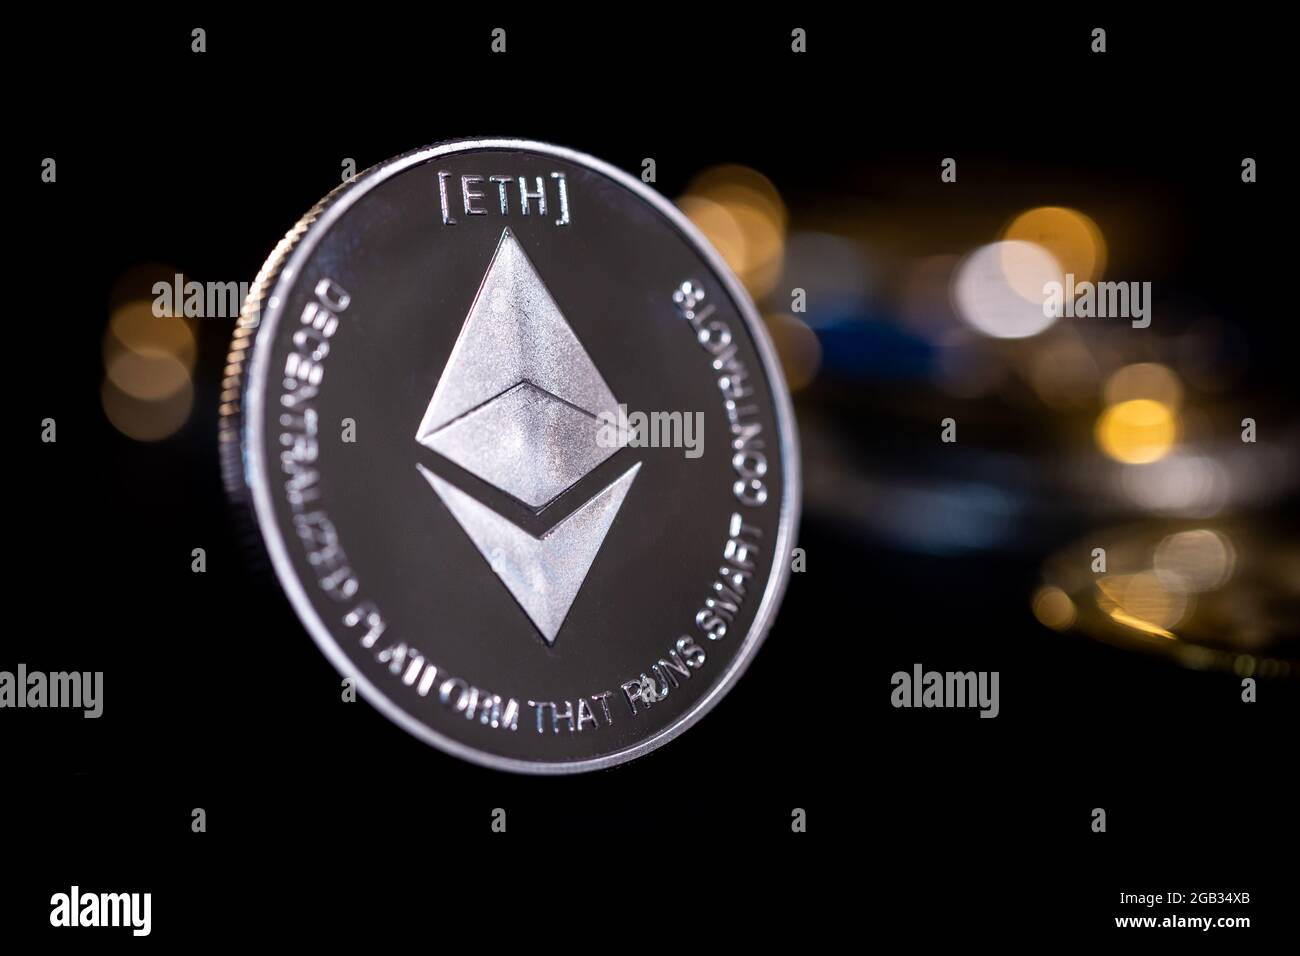 Ethereum cryptocurrency coin Stock Photo